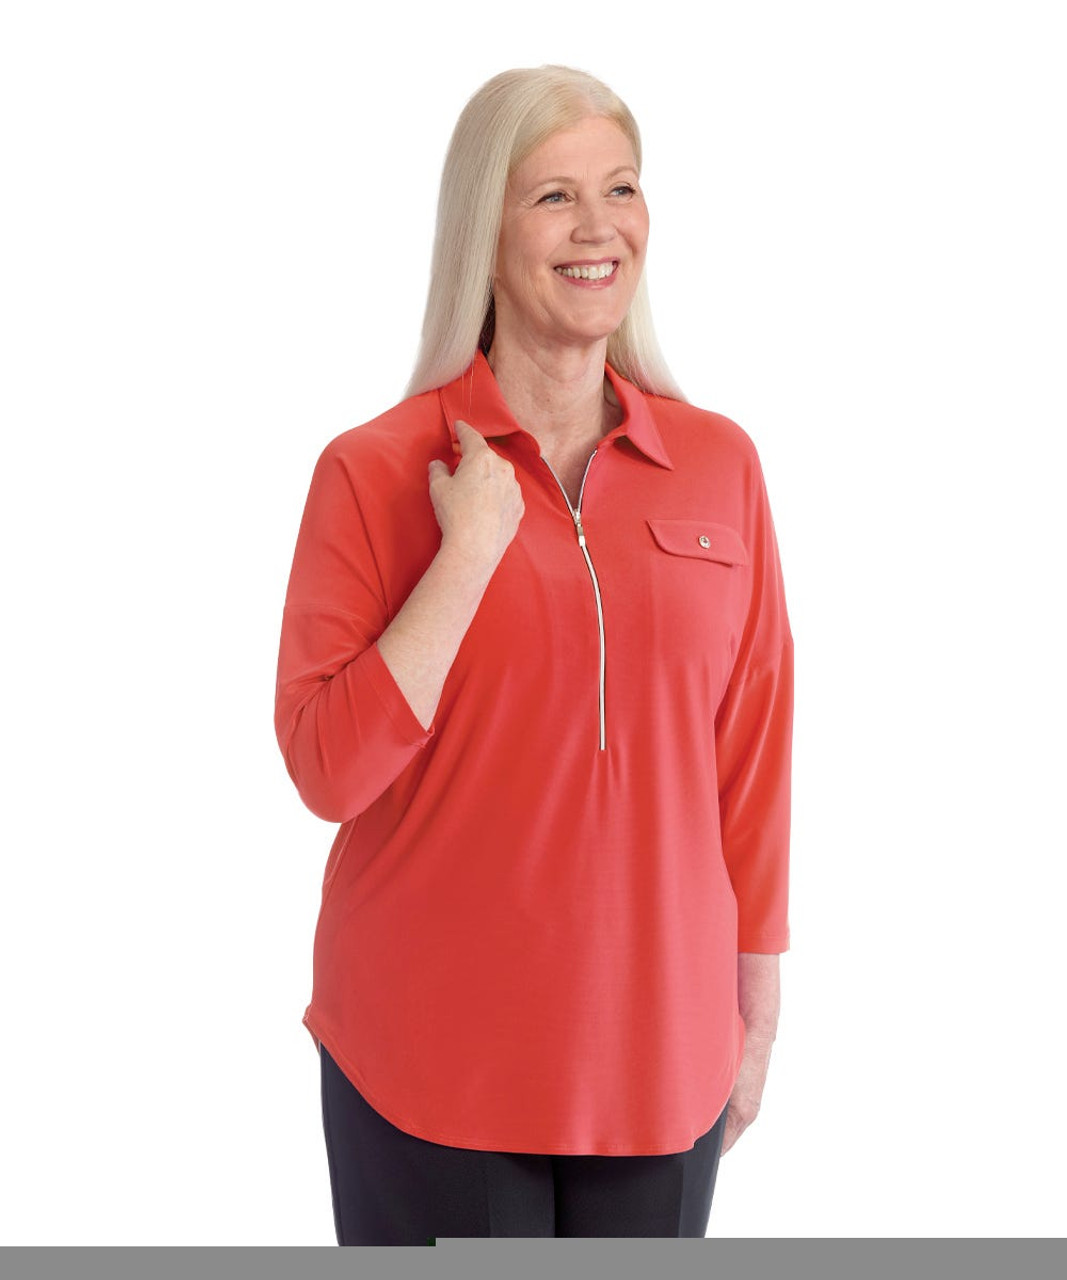 Silverts SV41030 Women's Zip-Front Top for Self-Dressing  Living Coral, Size=M, SV41030-SV1344-M